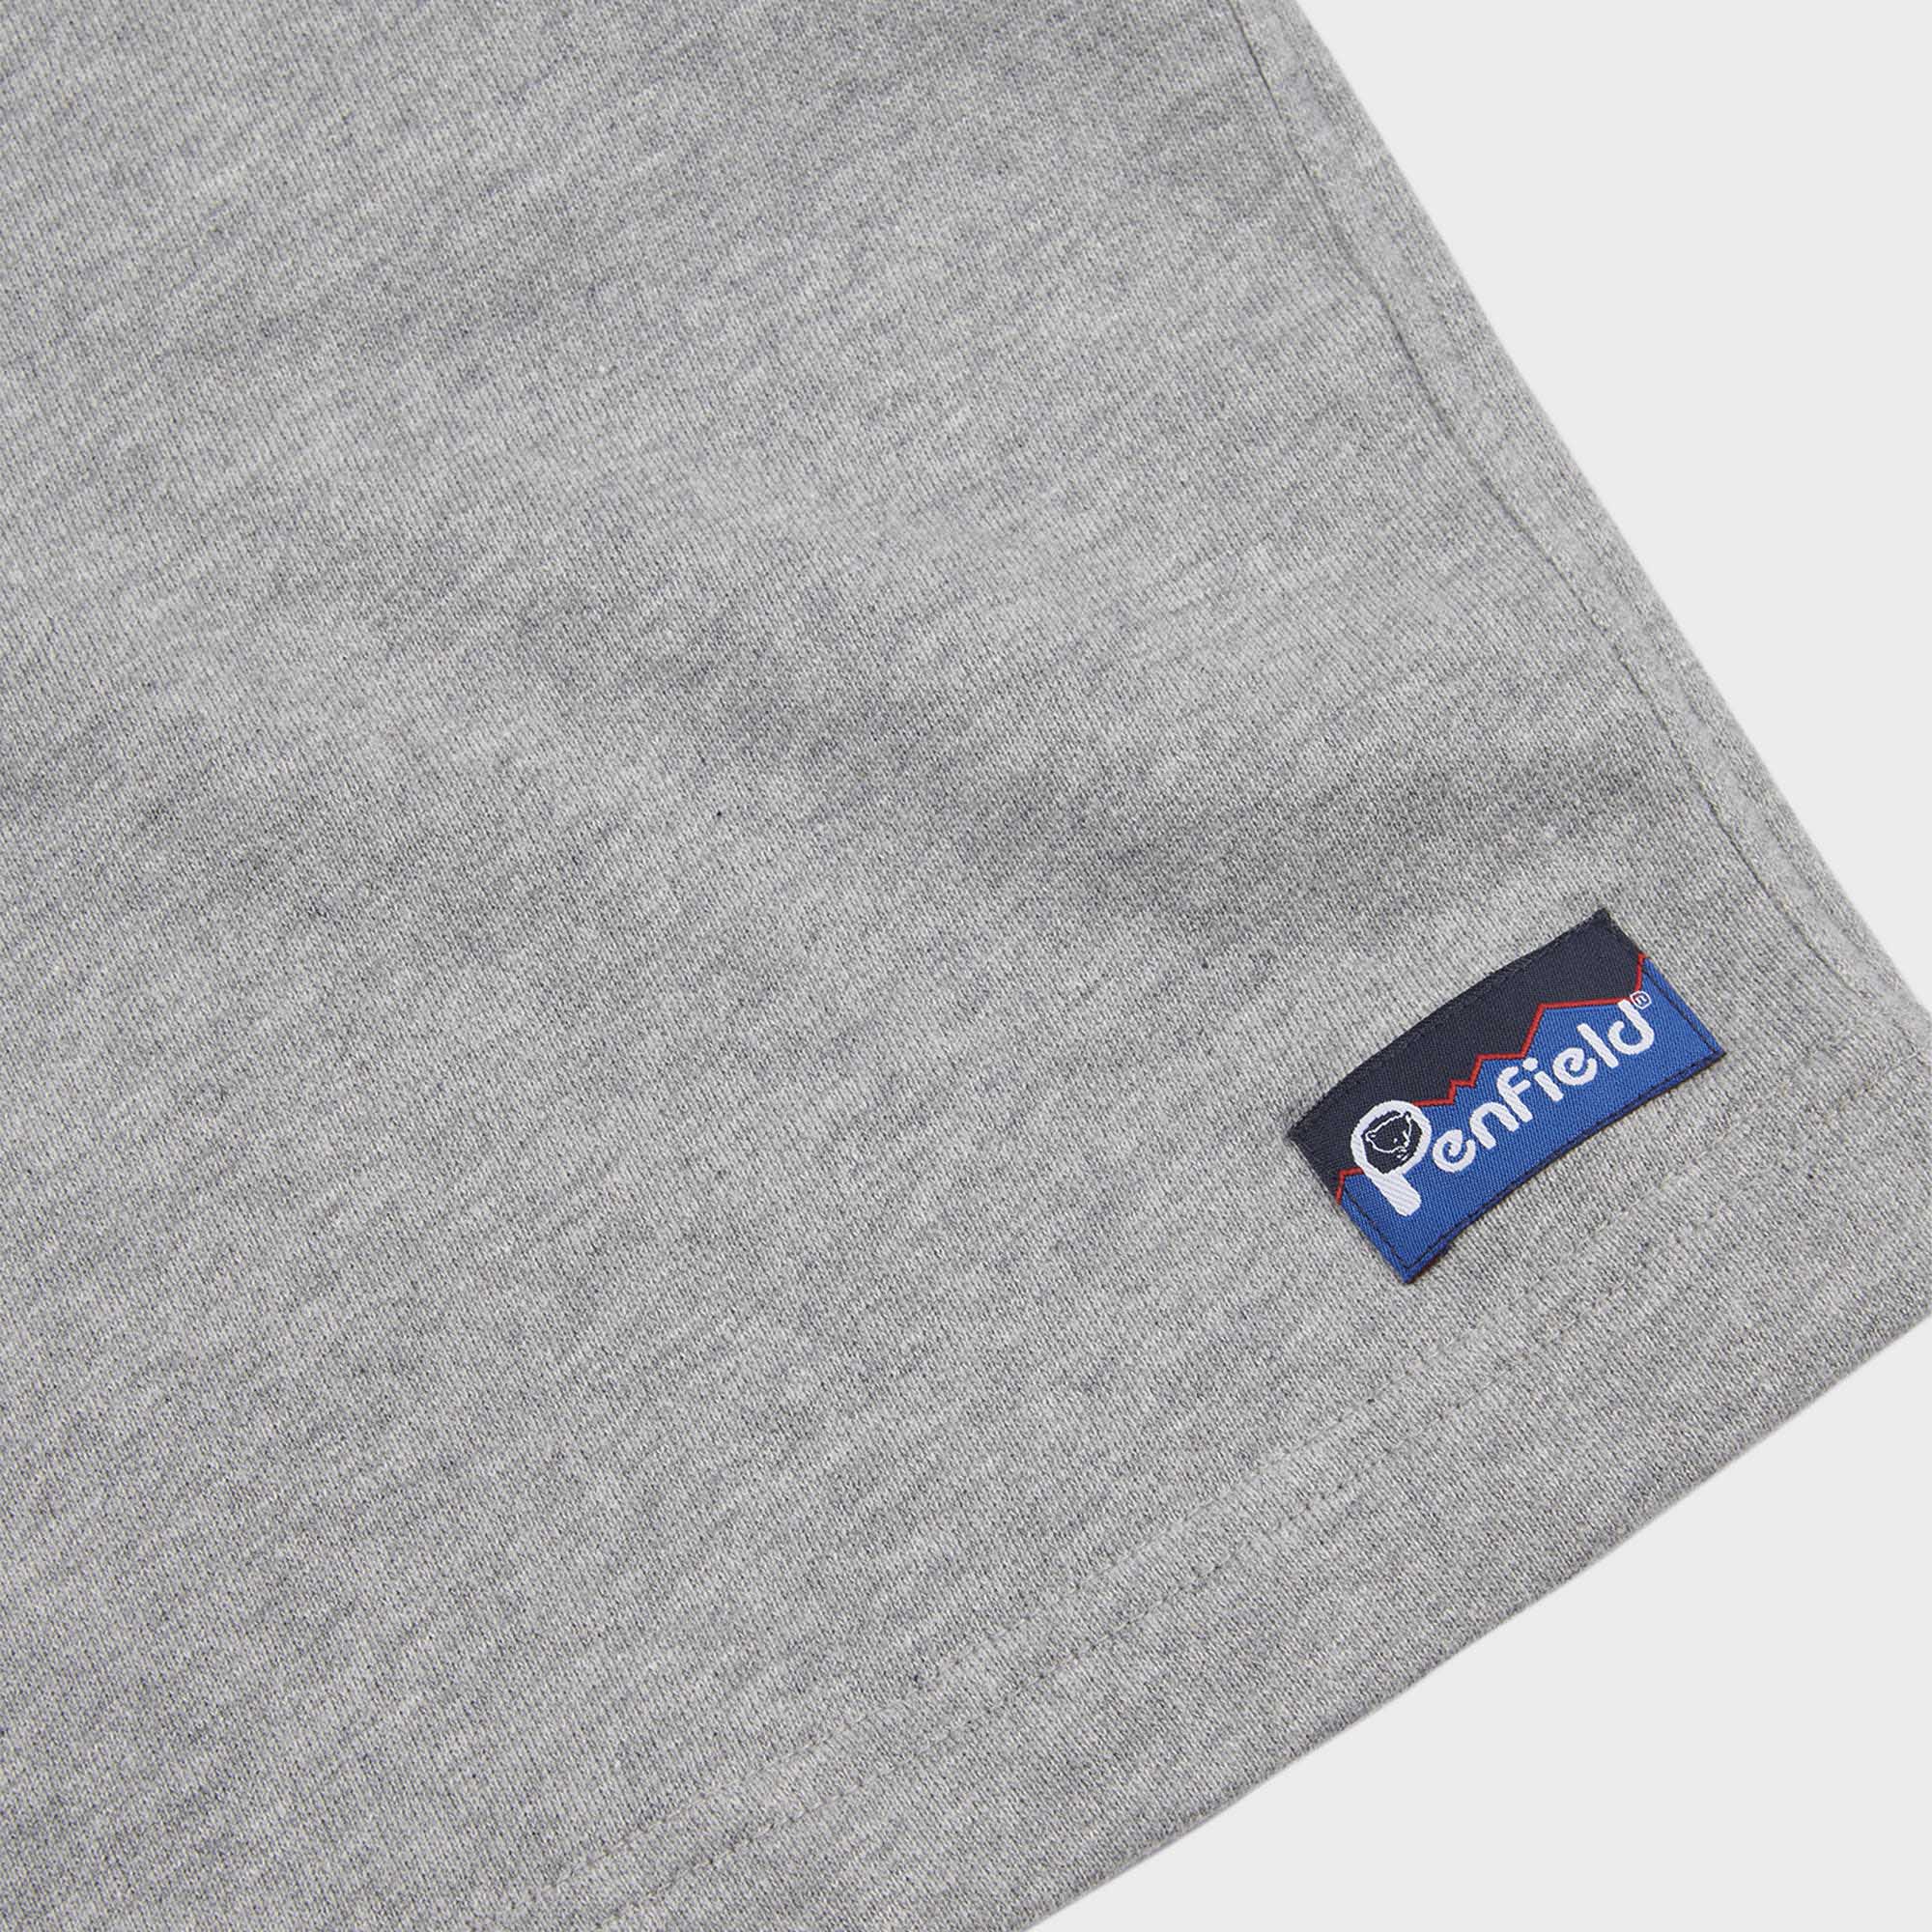 Relaxed Fit Original Logo Shorts in Athletic Grey Heather